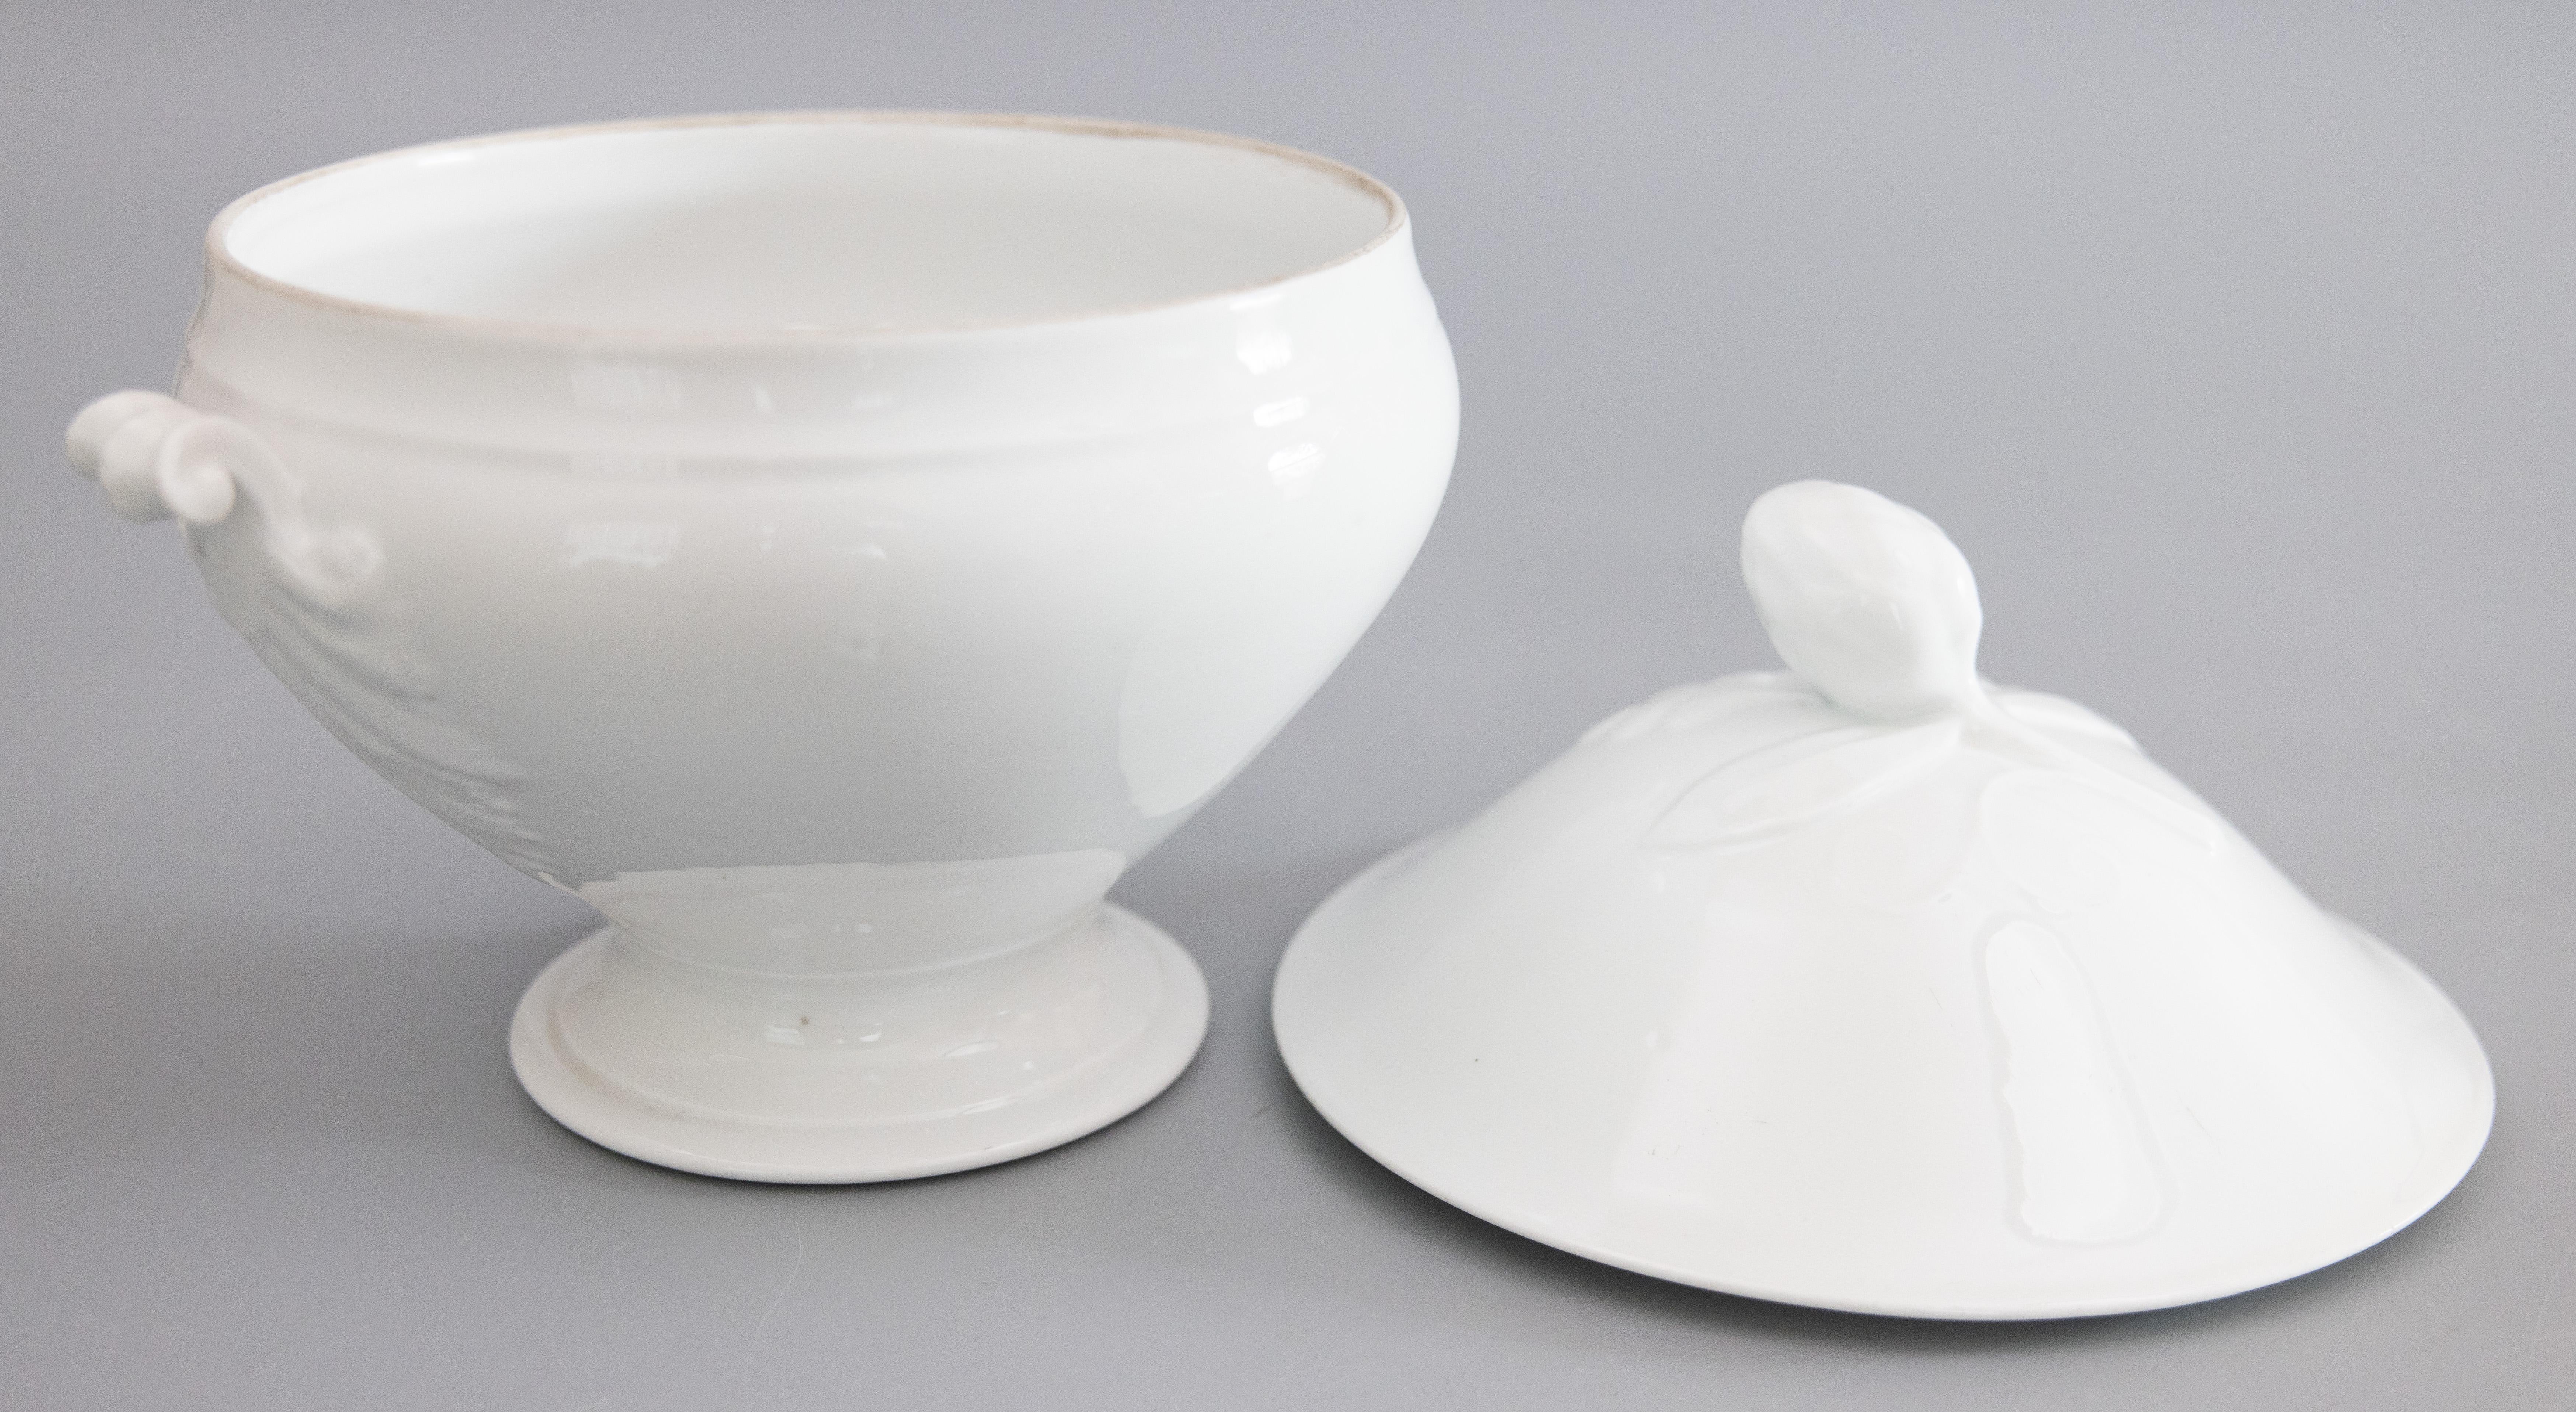 Antique French White Ironstone Lidded Soup Tureen In Good Condition For Sale In Pearland, TX